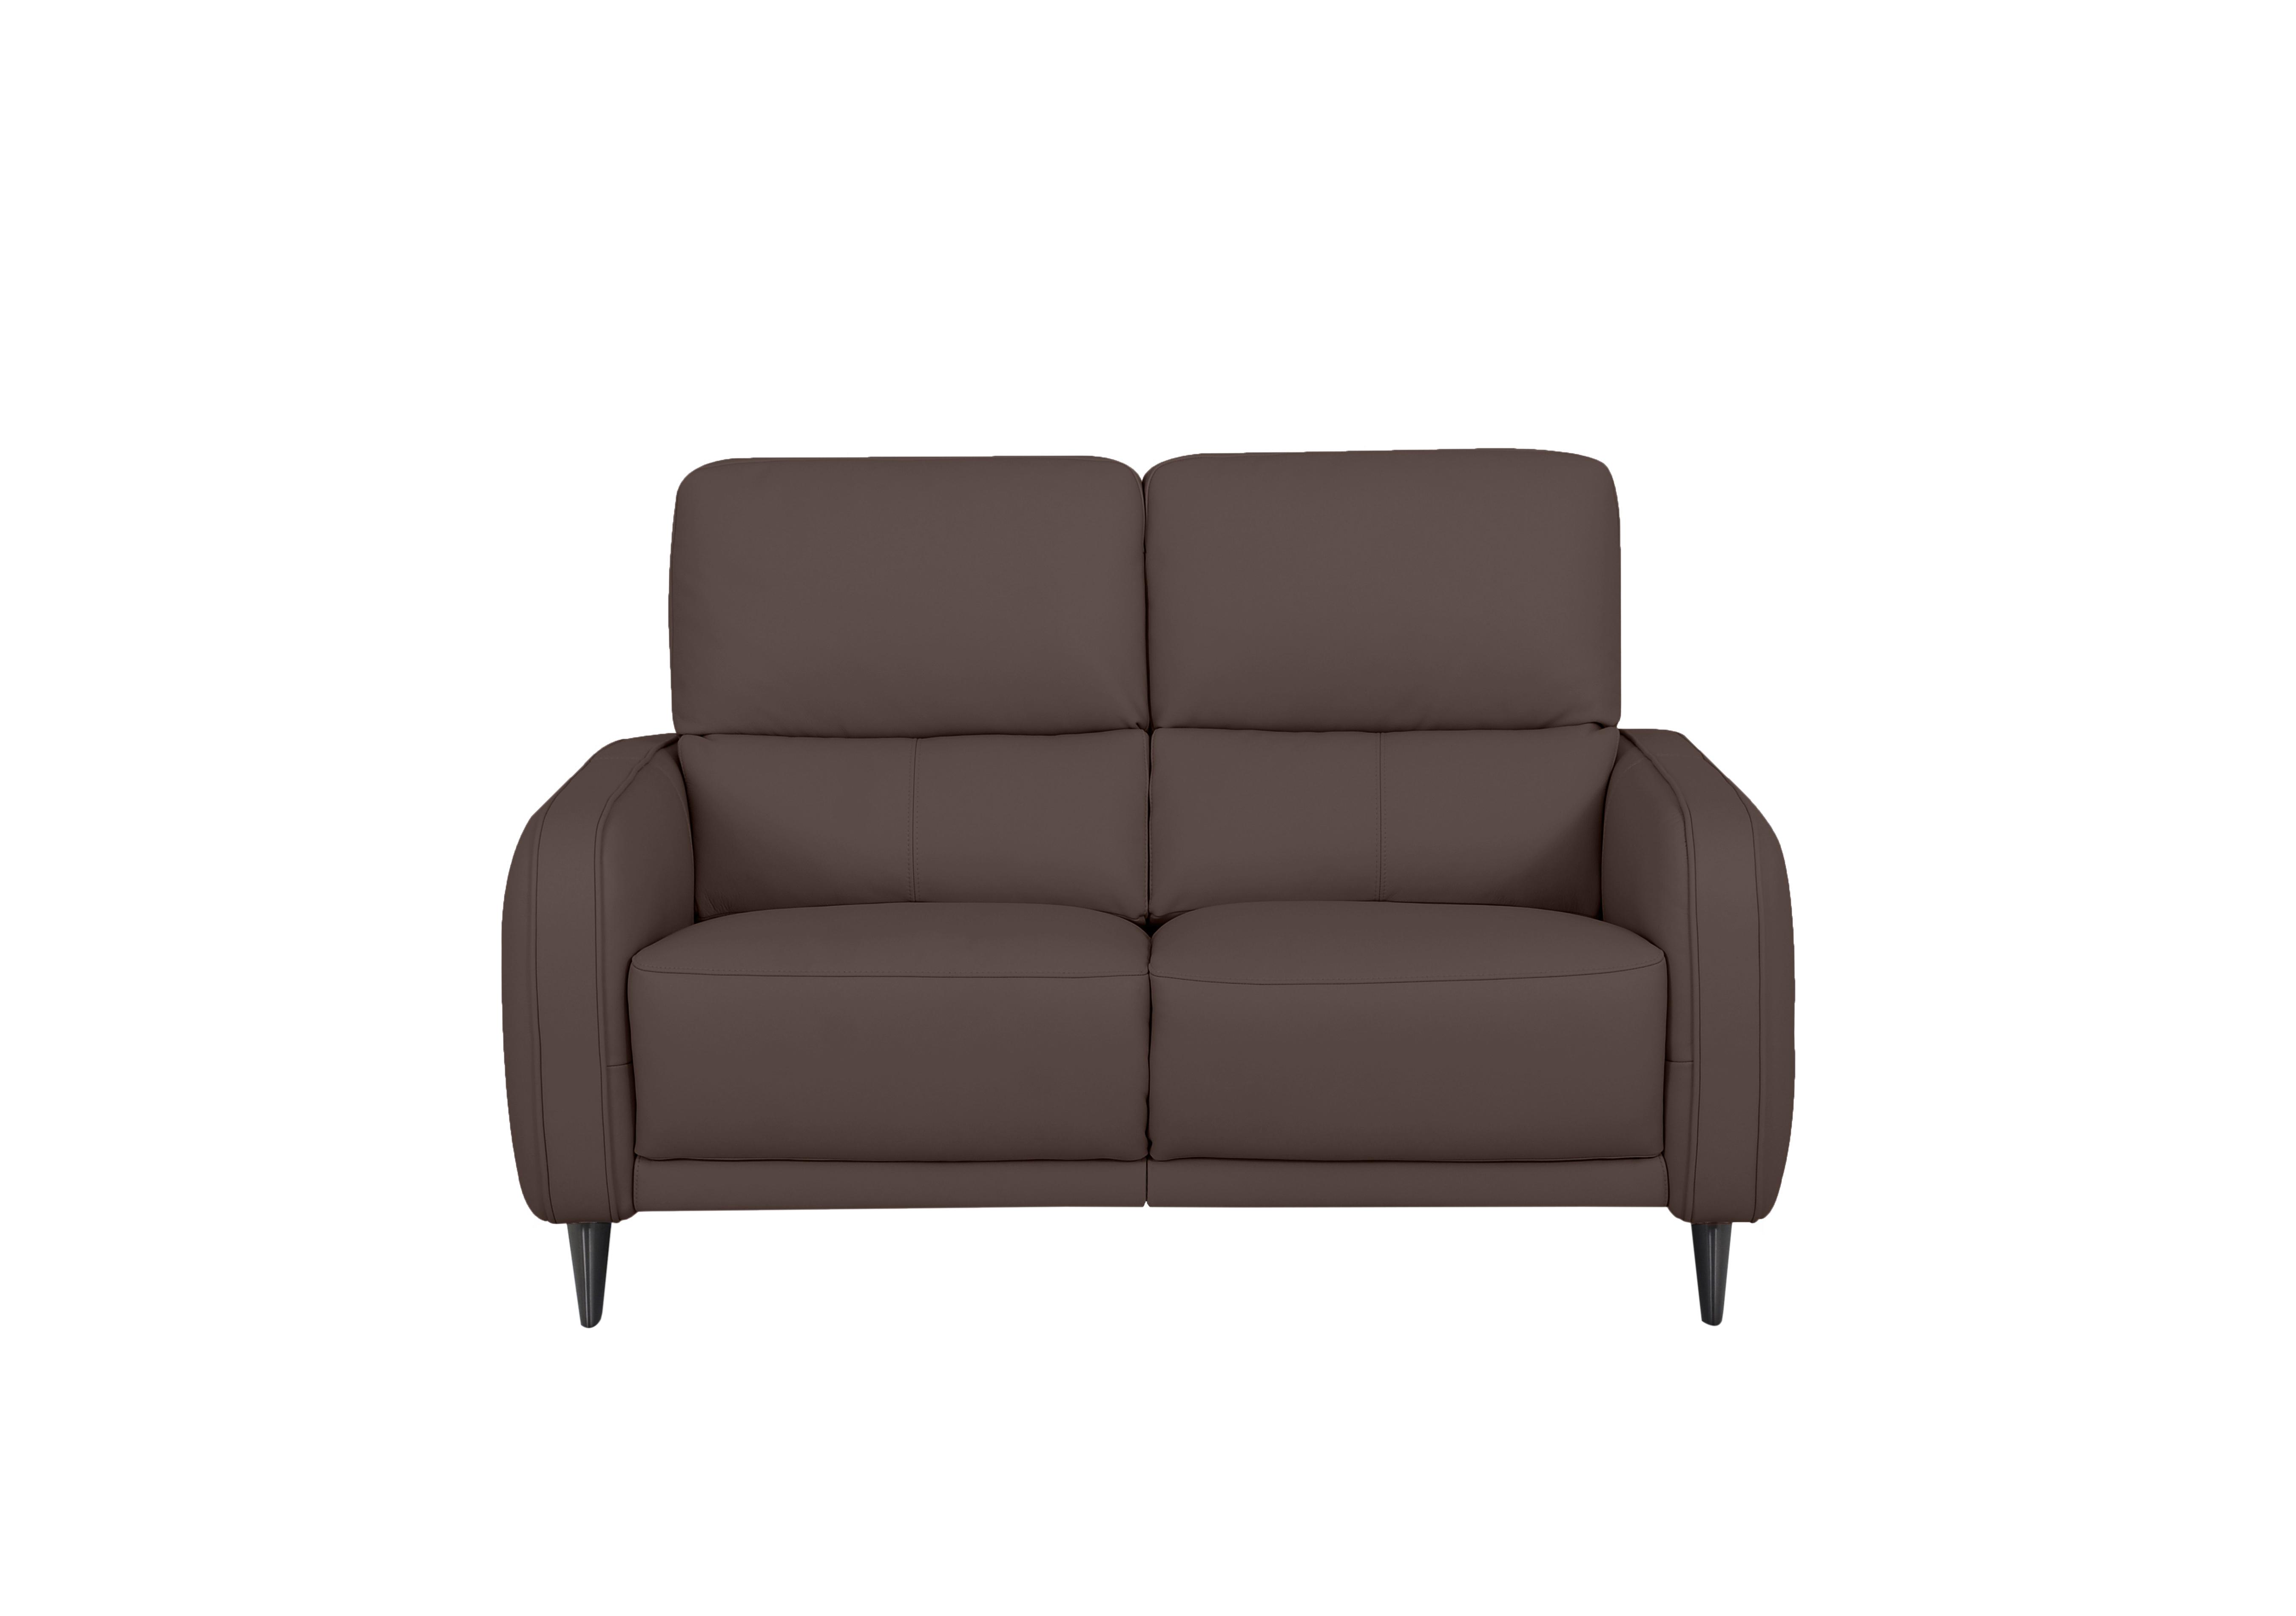 Logan 2 Seater Leather Sofa in Nn-512e Cacao Brown on Furniture Village